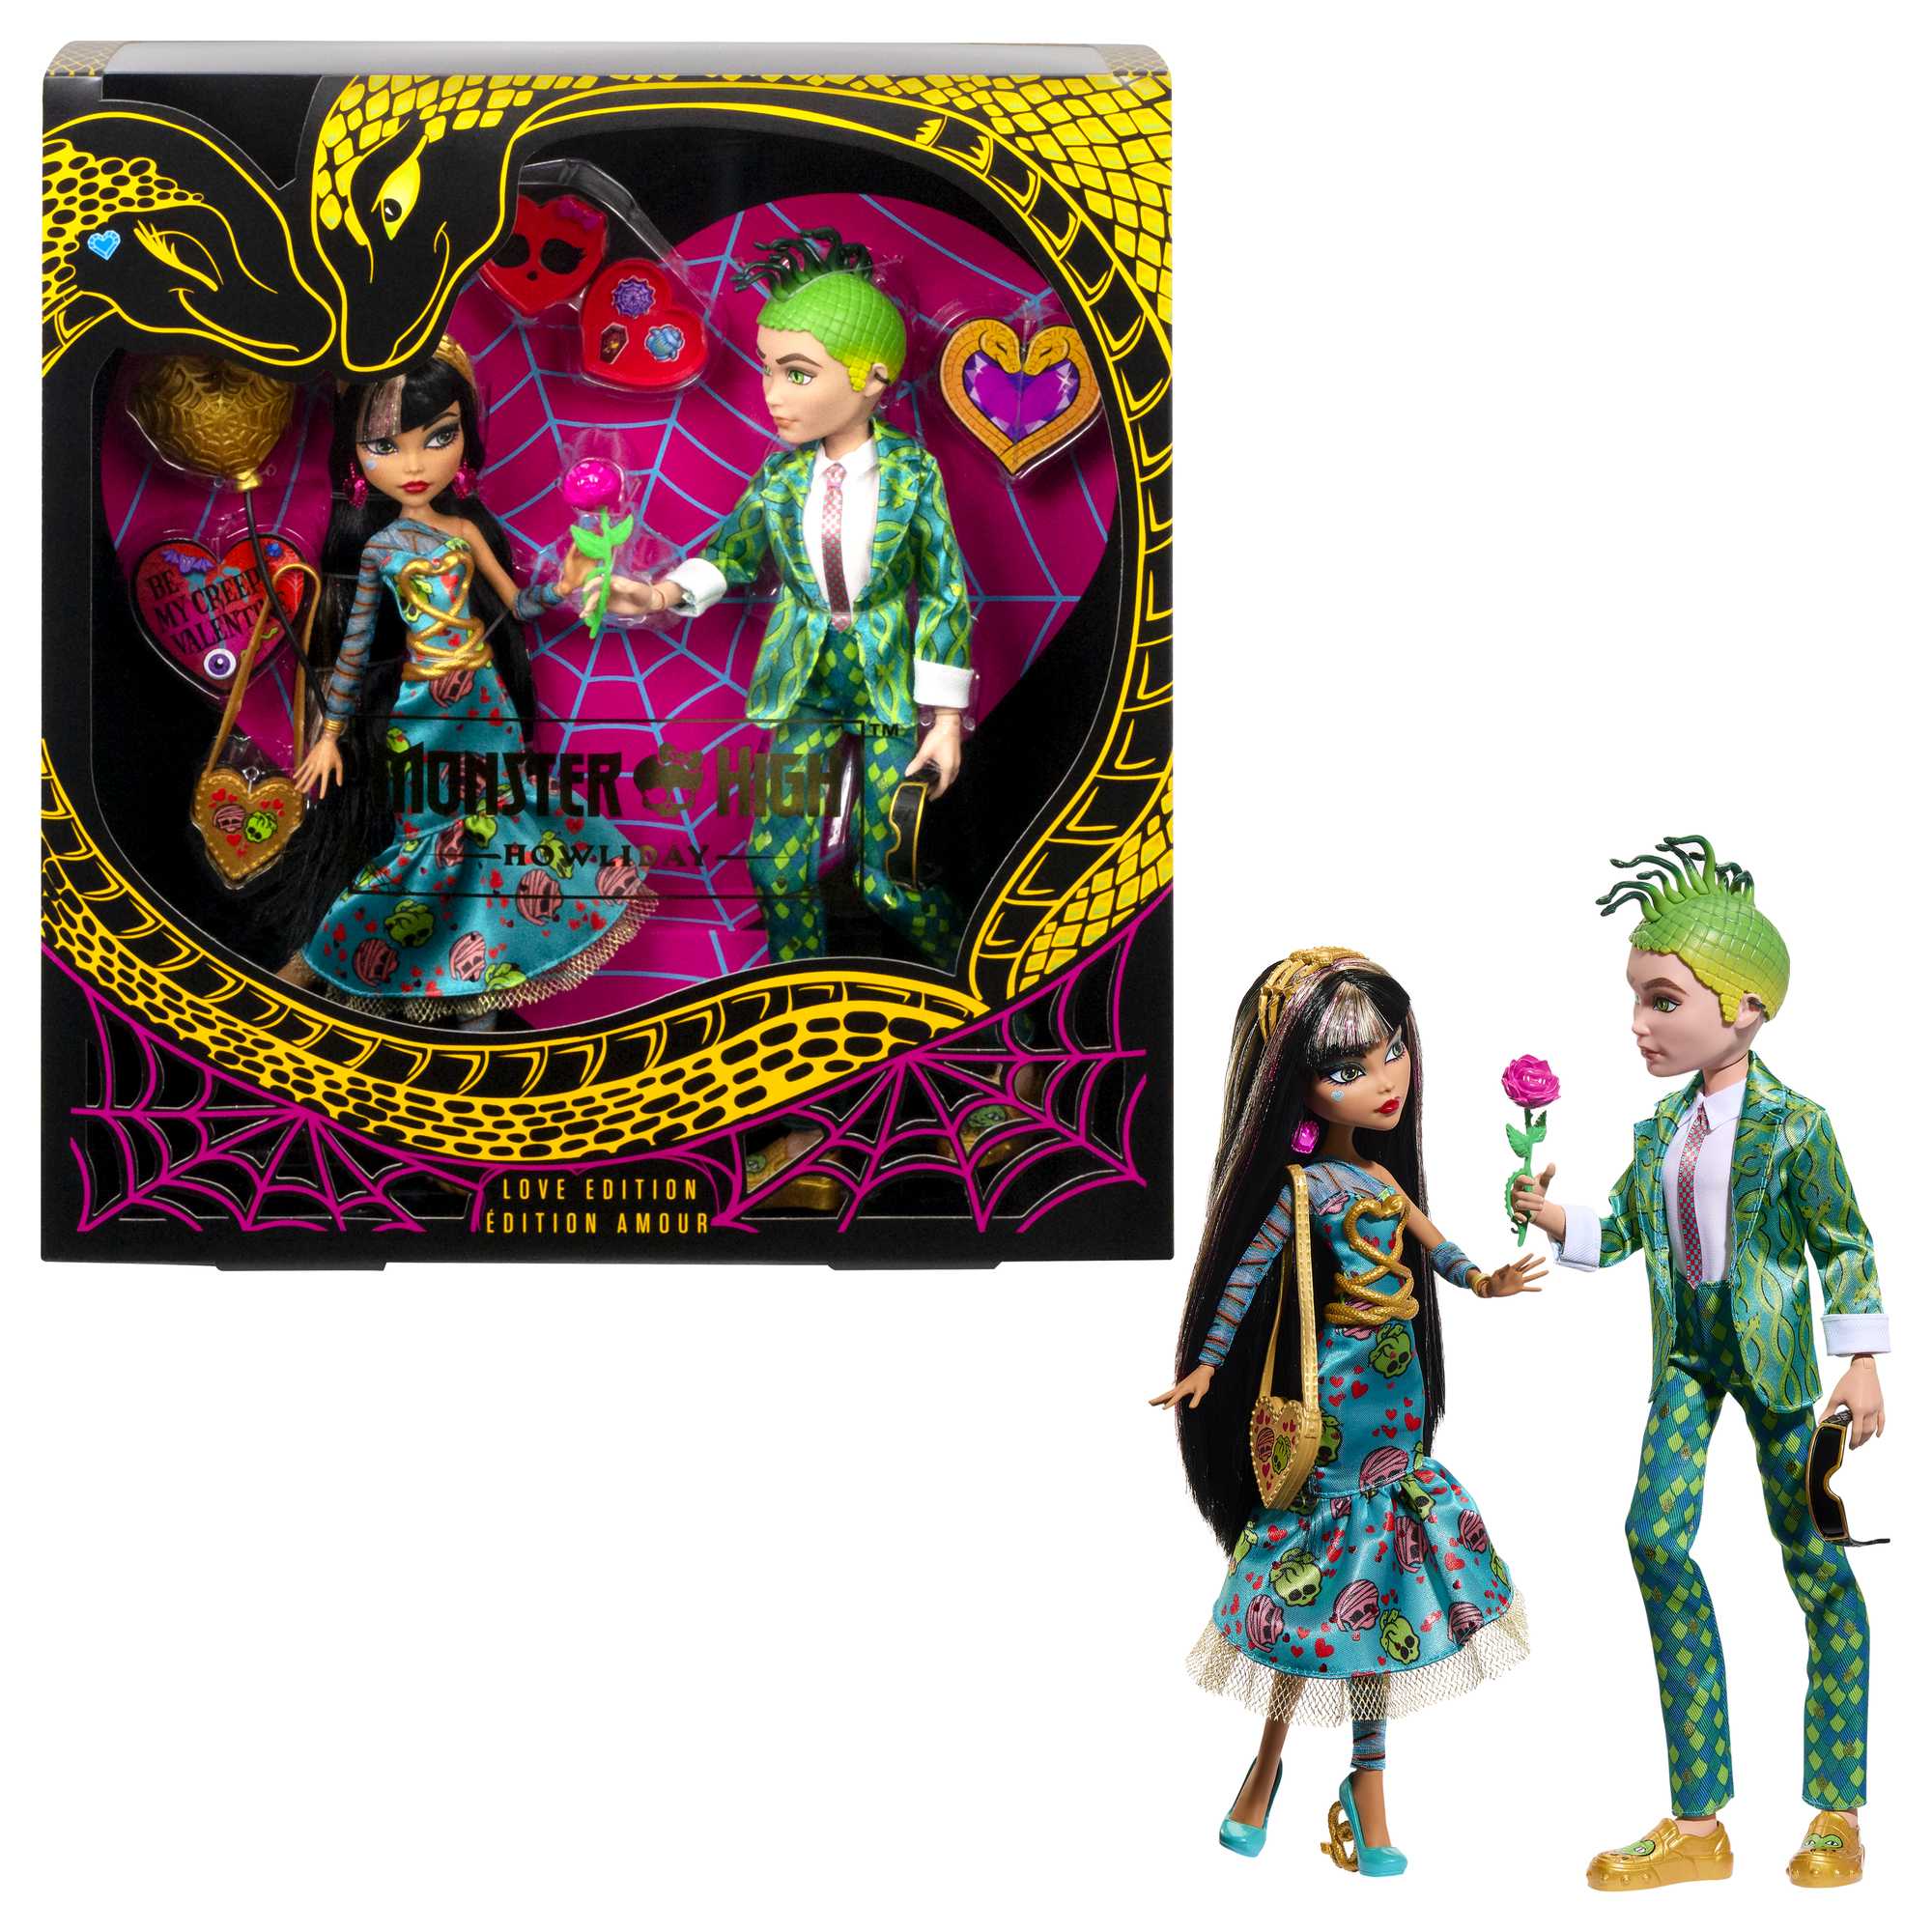 Monster High Cleo De Nile Doll in Monster Ball Party Dress with Accessories  